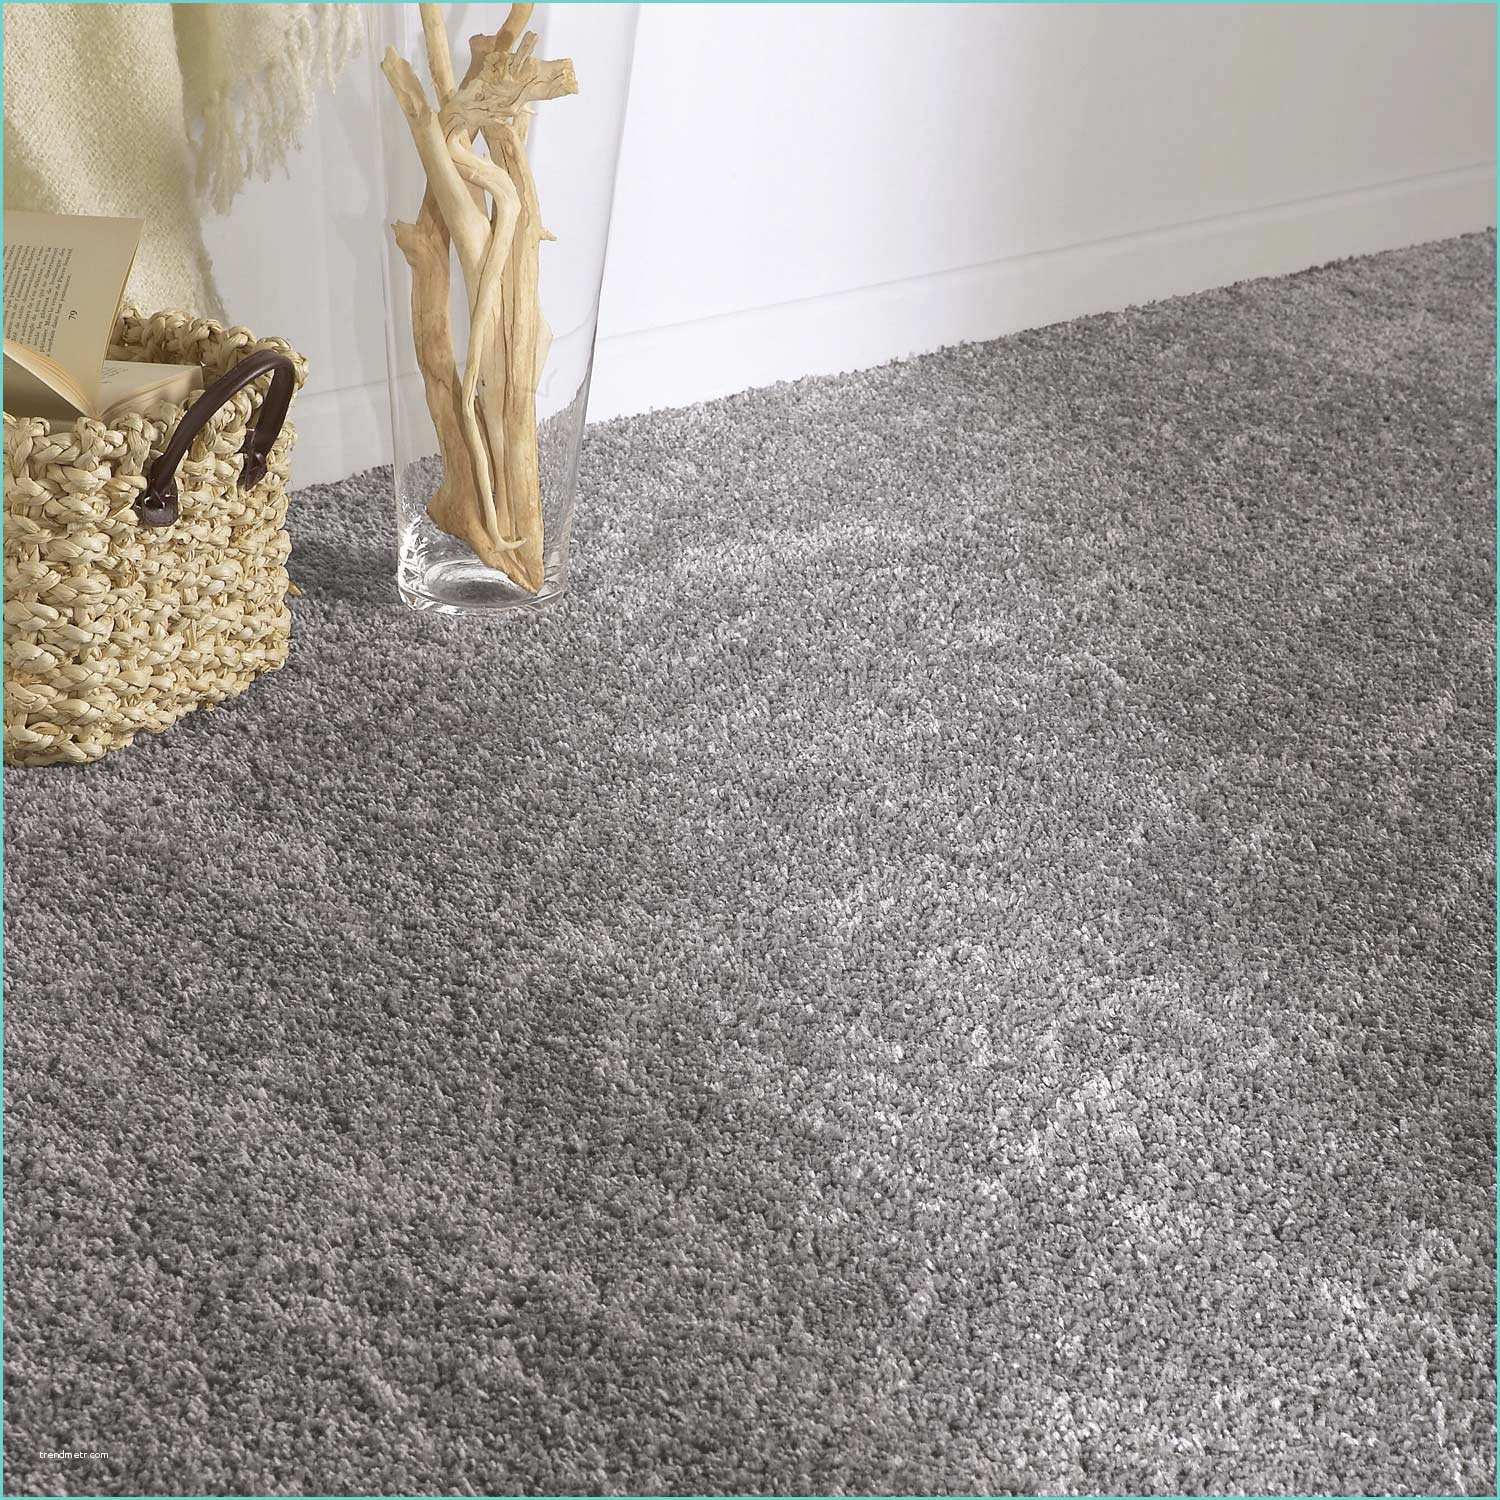 Piege A Taupe Leroy Merlin Moquette Velours Moonshadow Artens Taupe 4 M